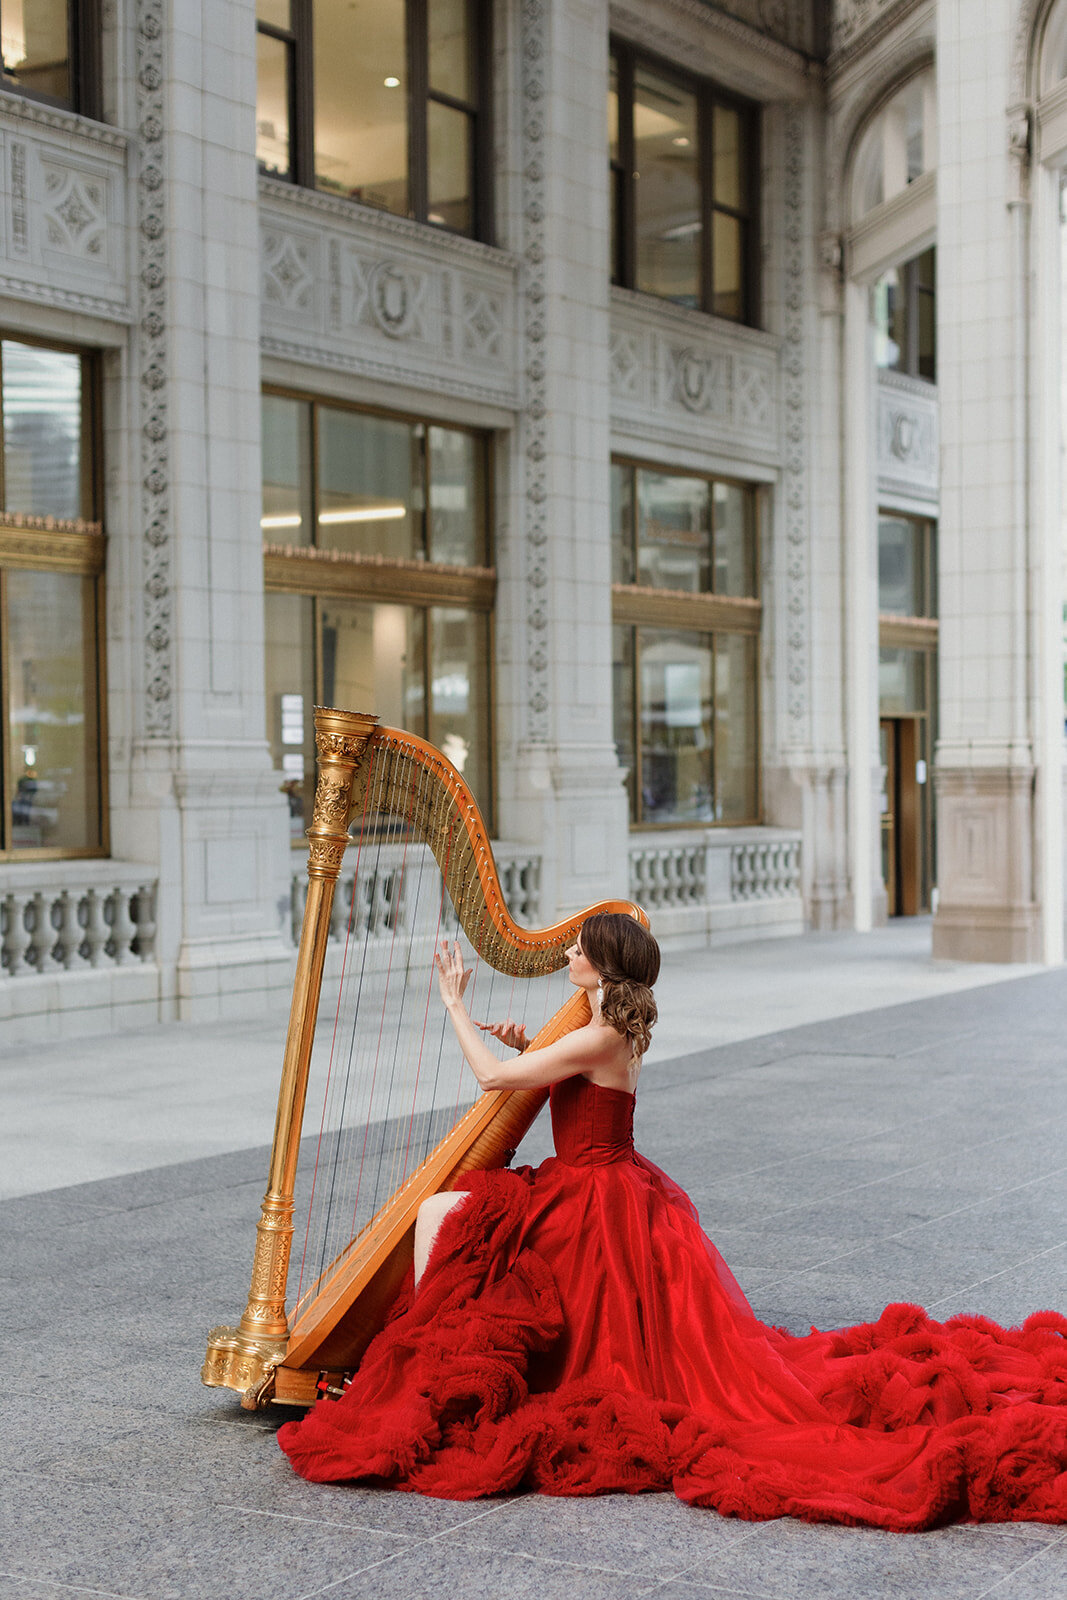 woman in long red gown draped behind her playing gold harp. She is seated in the urban courtyard at Wrigley Building in Chicago.